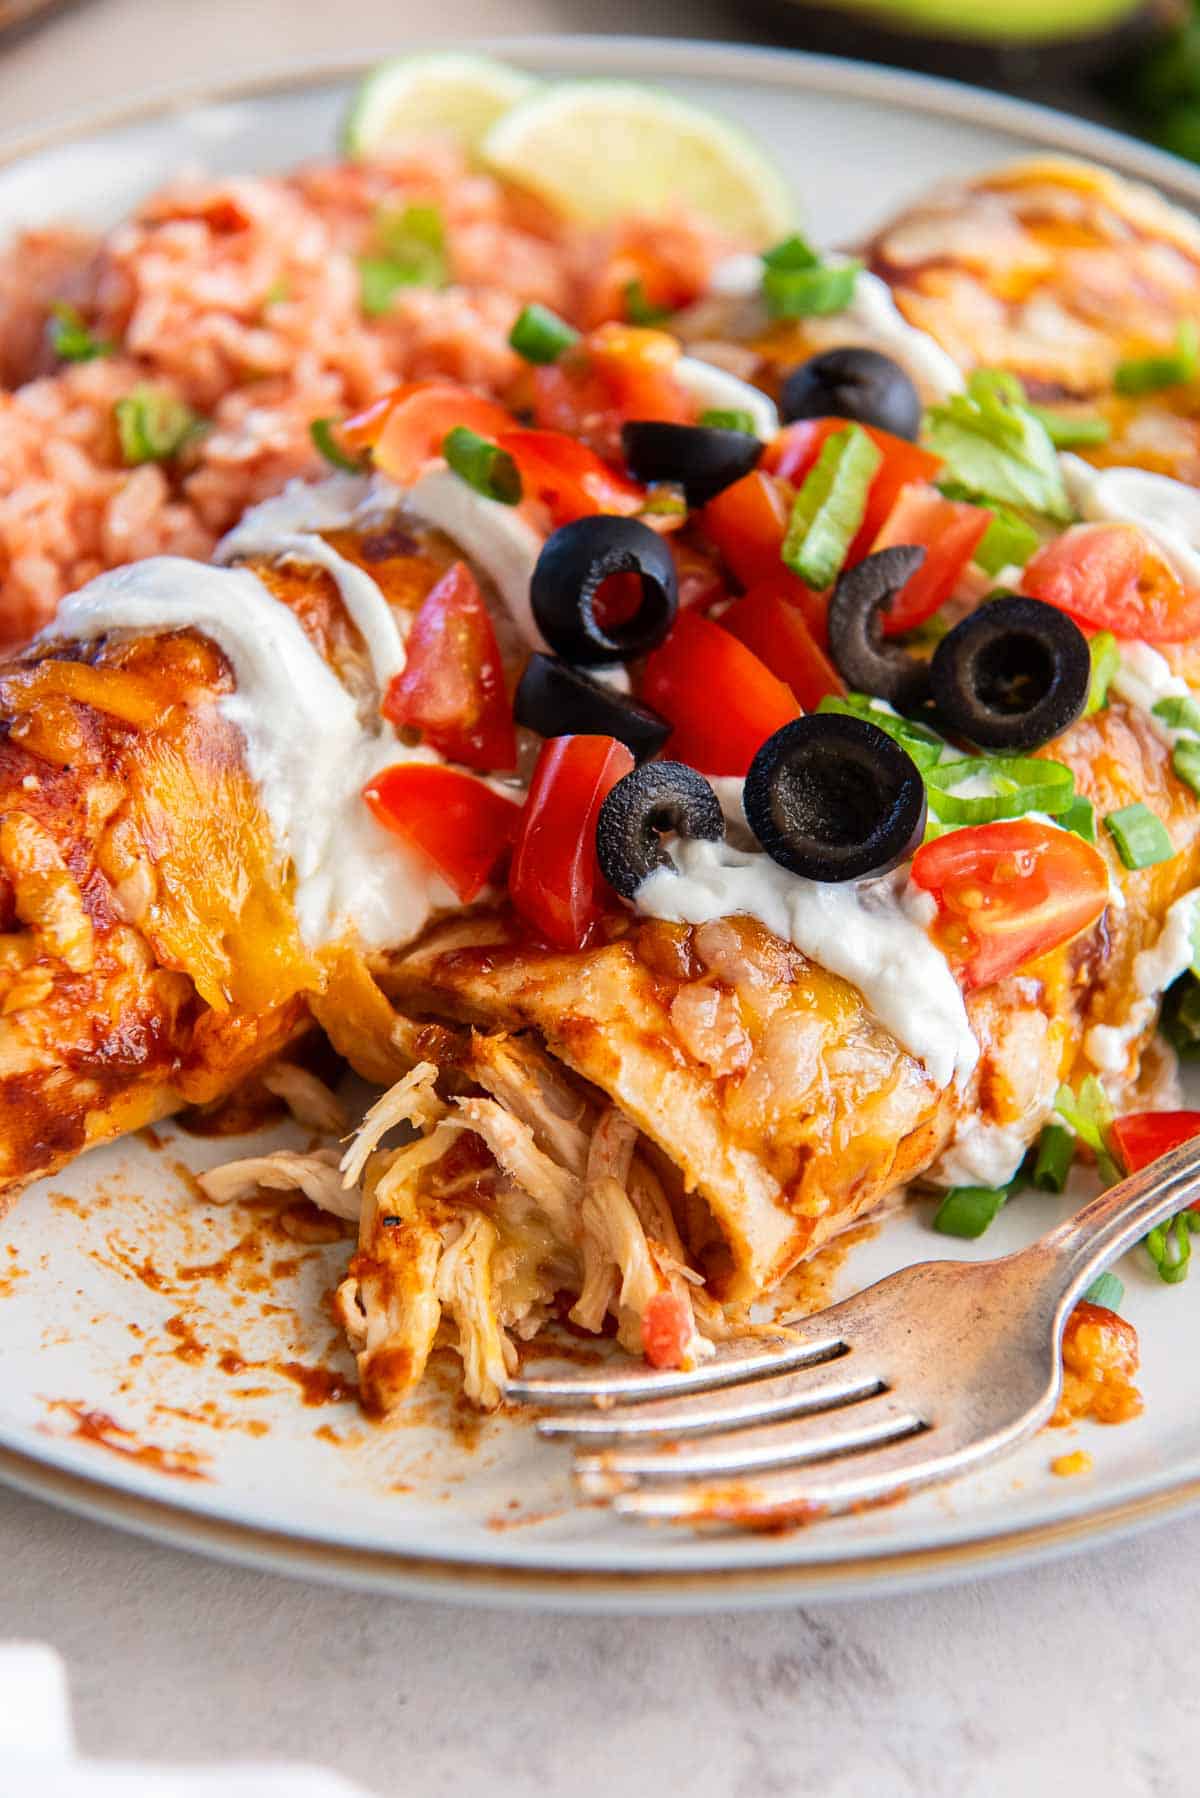 A fork lying next to chicken enchiladas on a dinner plate.